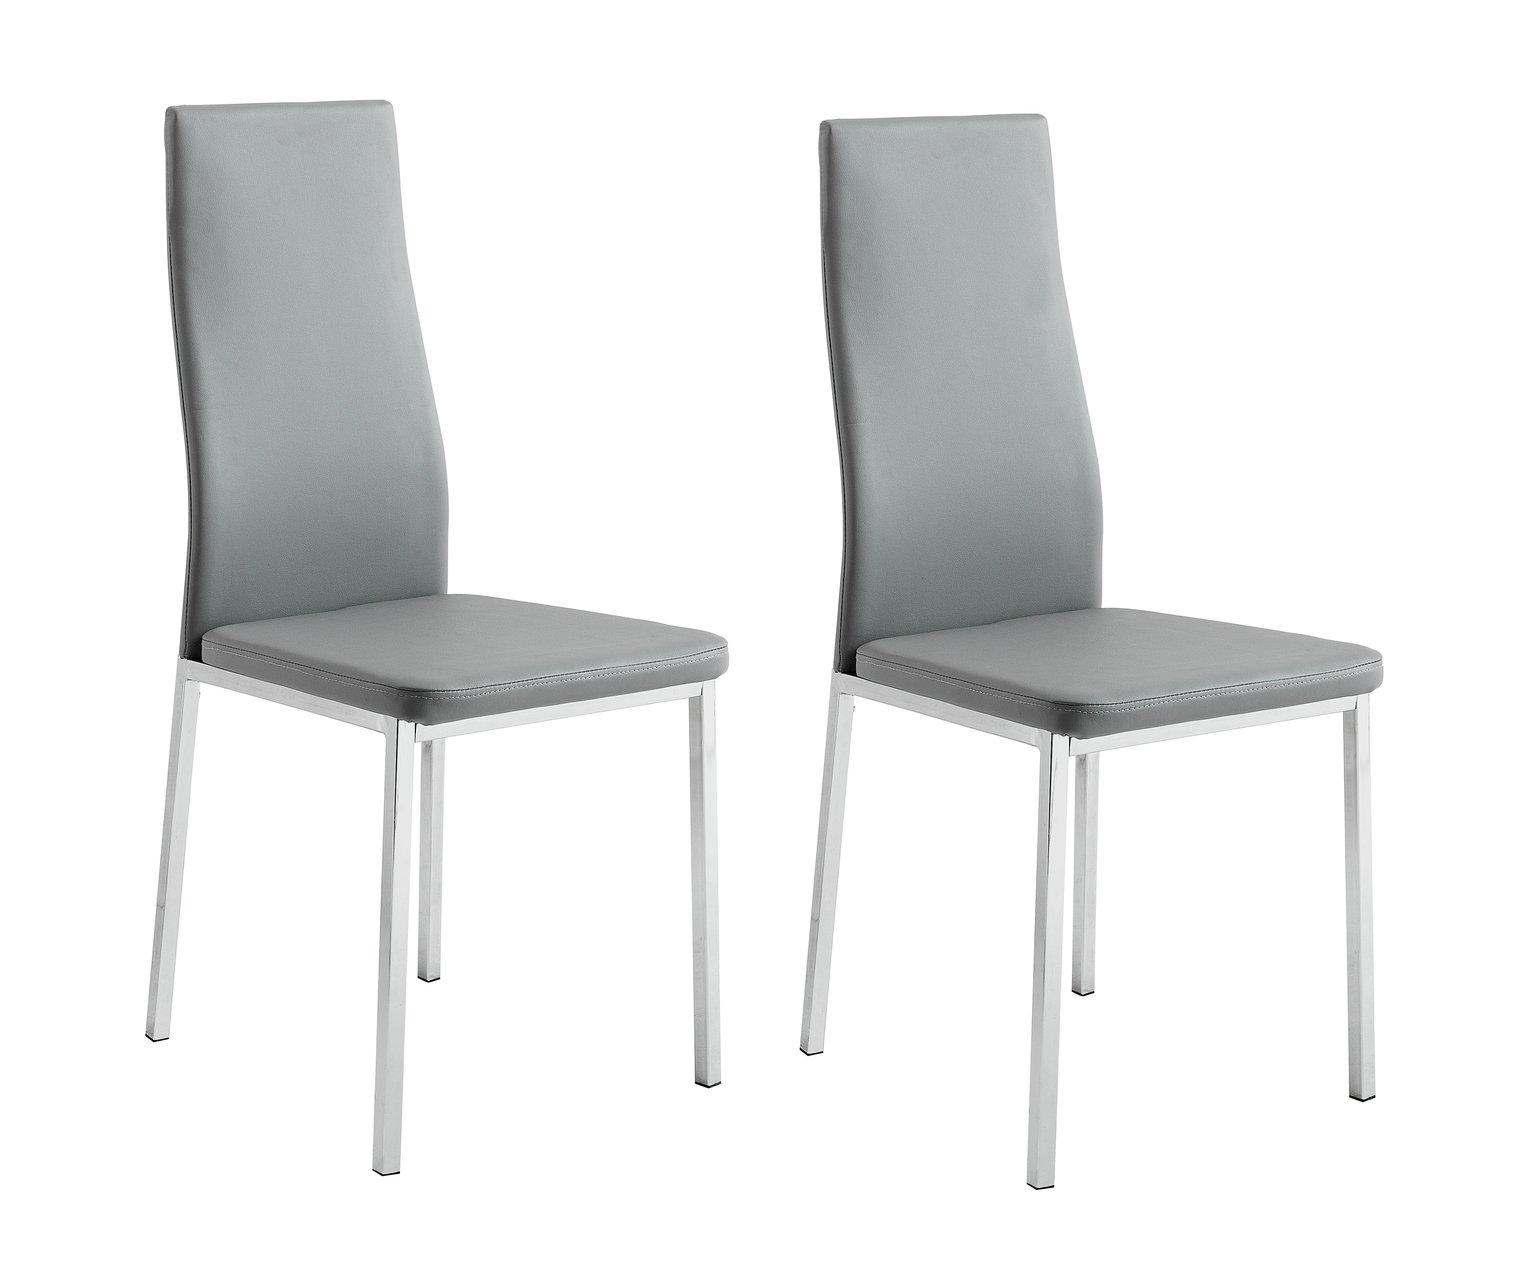 Argos Home Tia Pair of Chrome and Grey Dining Chairs